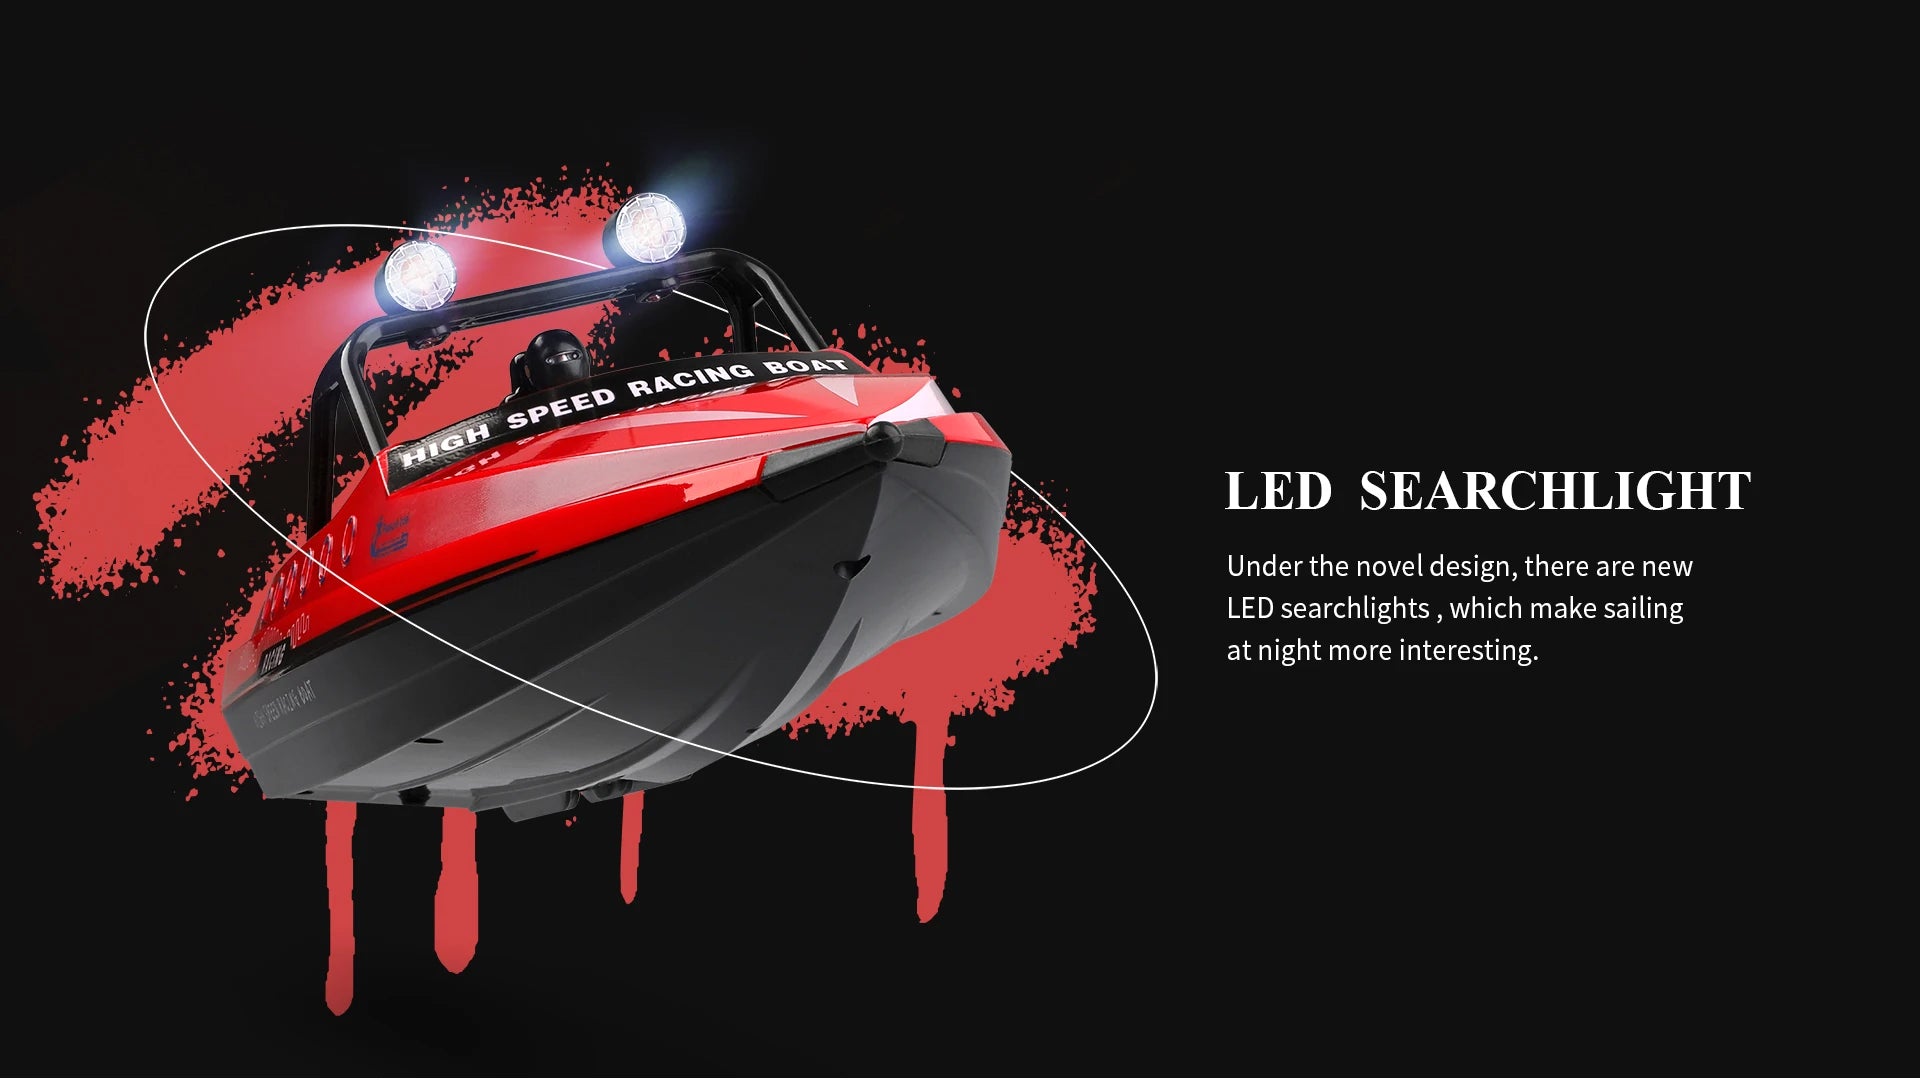 Wltoys WL917 Boat, new LED SEARCHLIGHT Under the novel design, there are new LED searchlights 